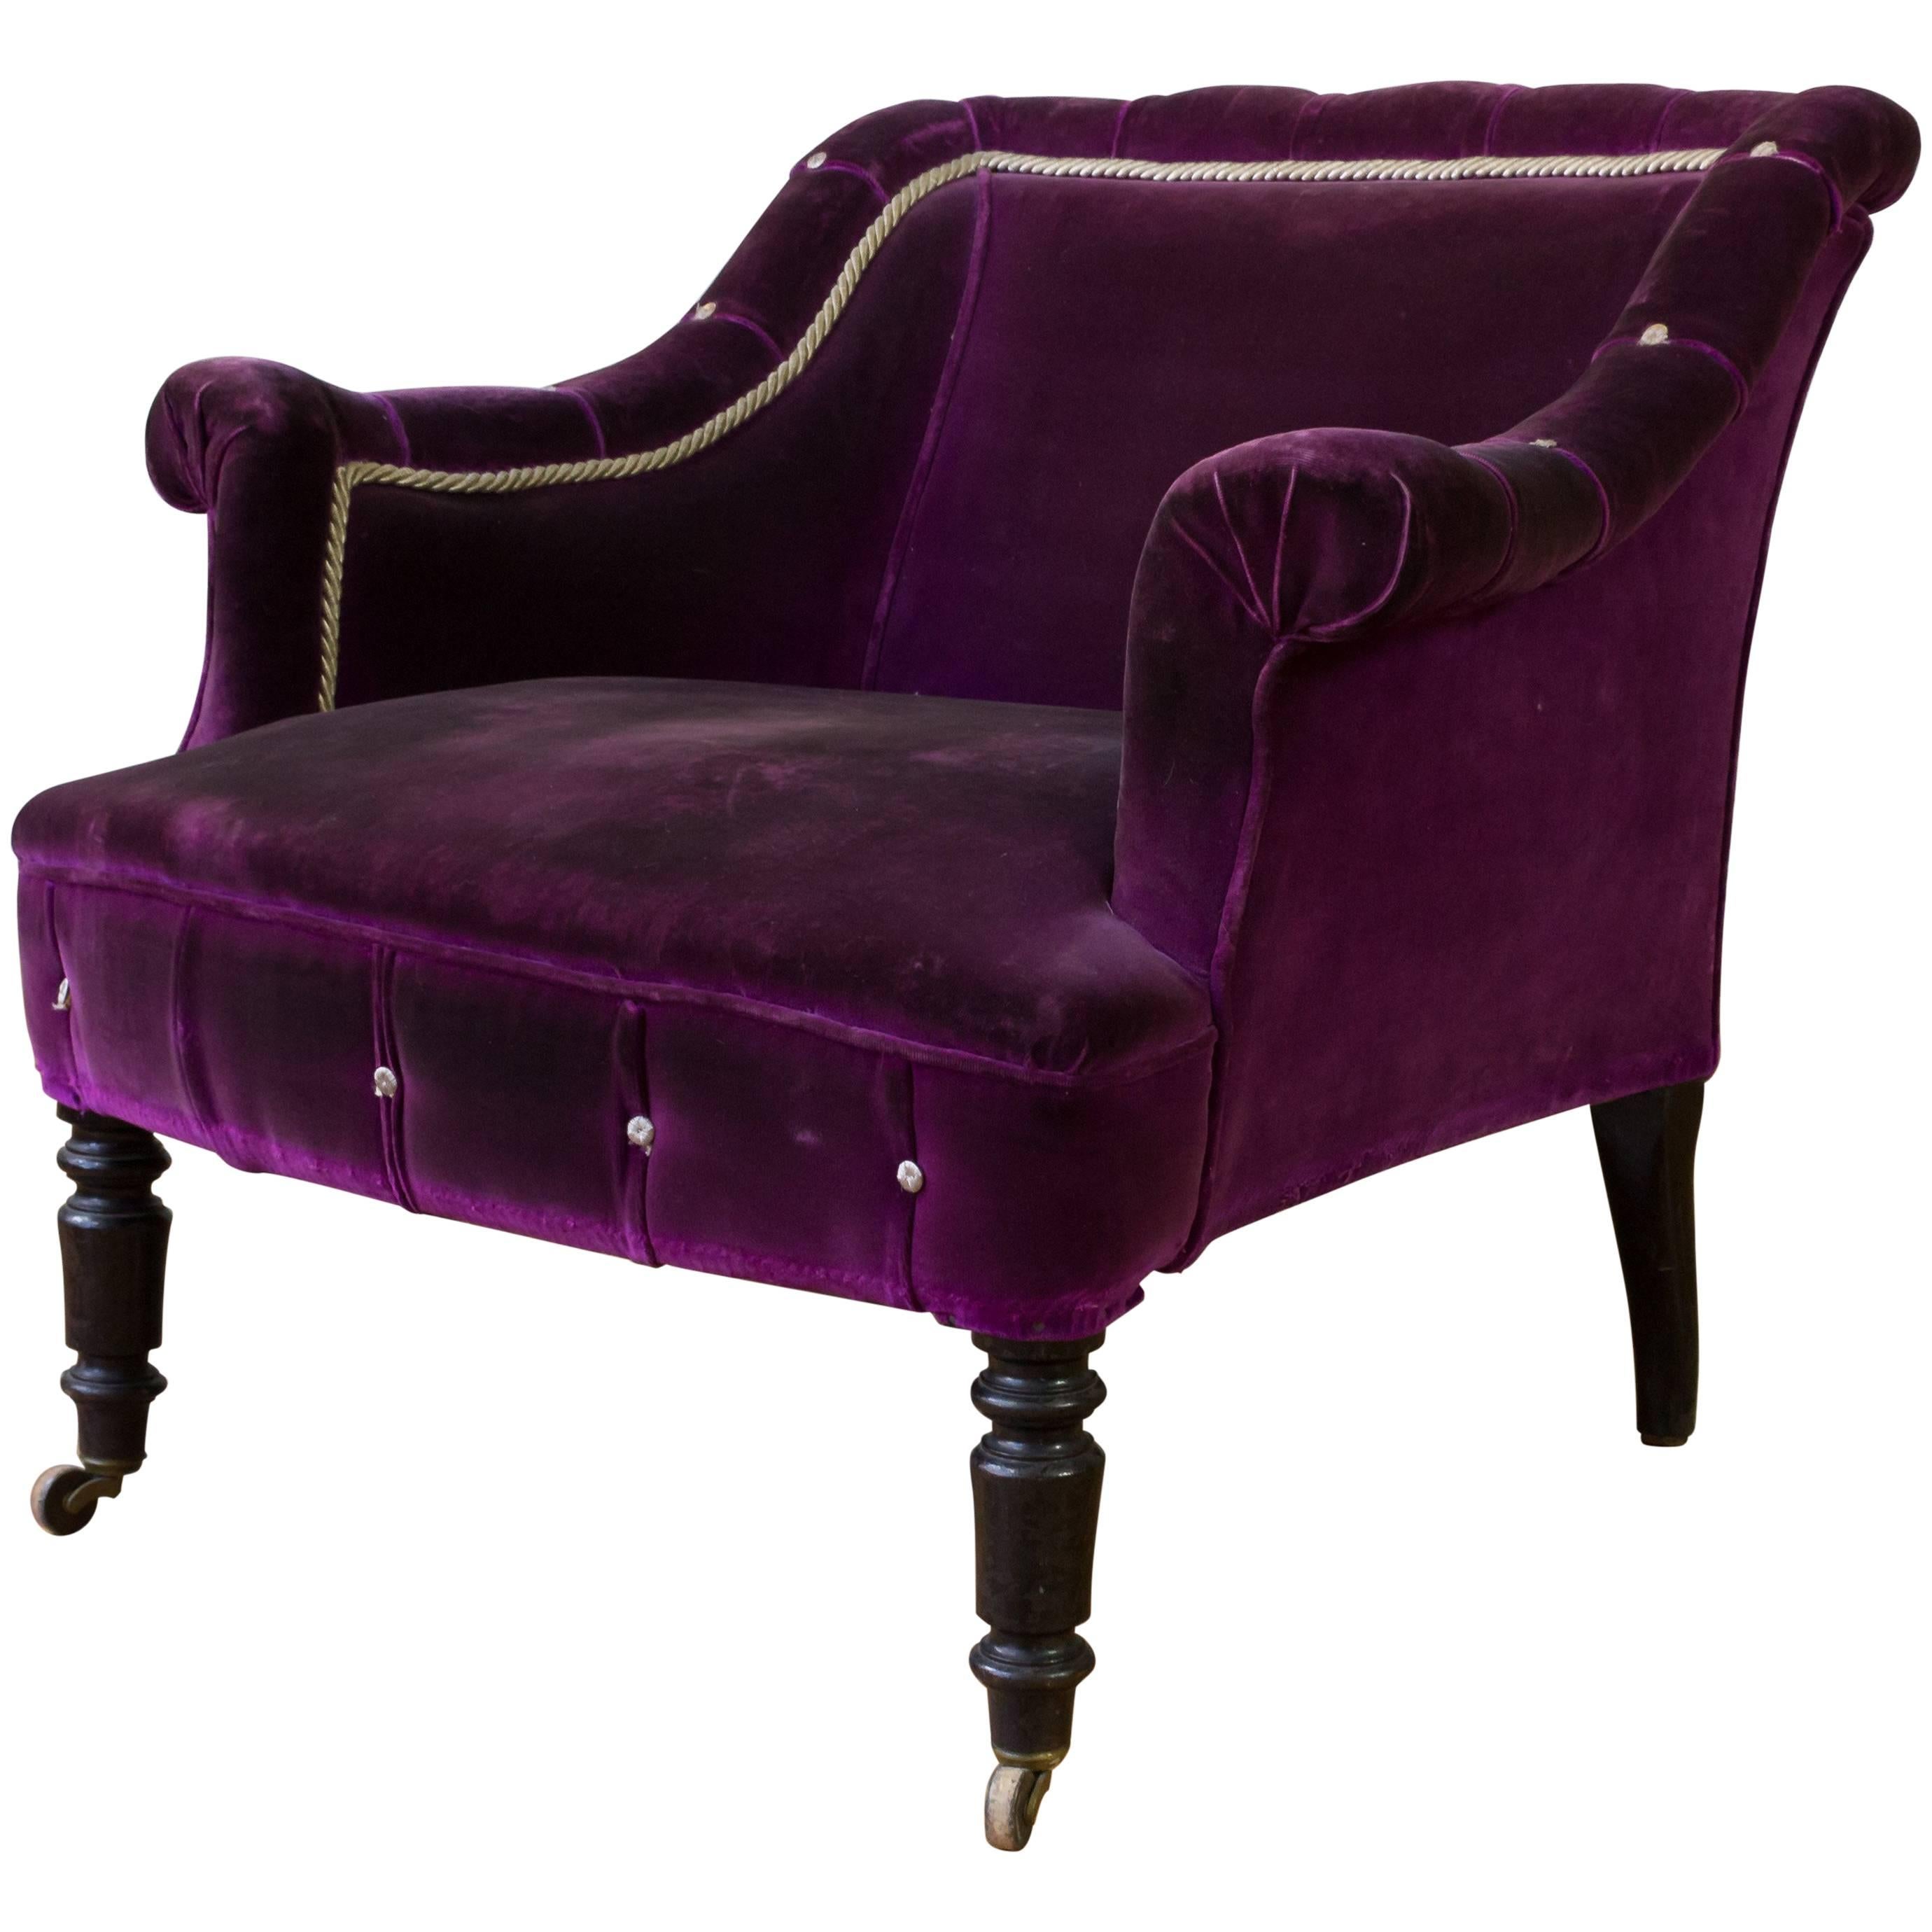 French 19th Century Armchair in Distressed Purple Velvet with White Braided Trim